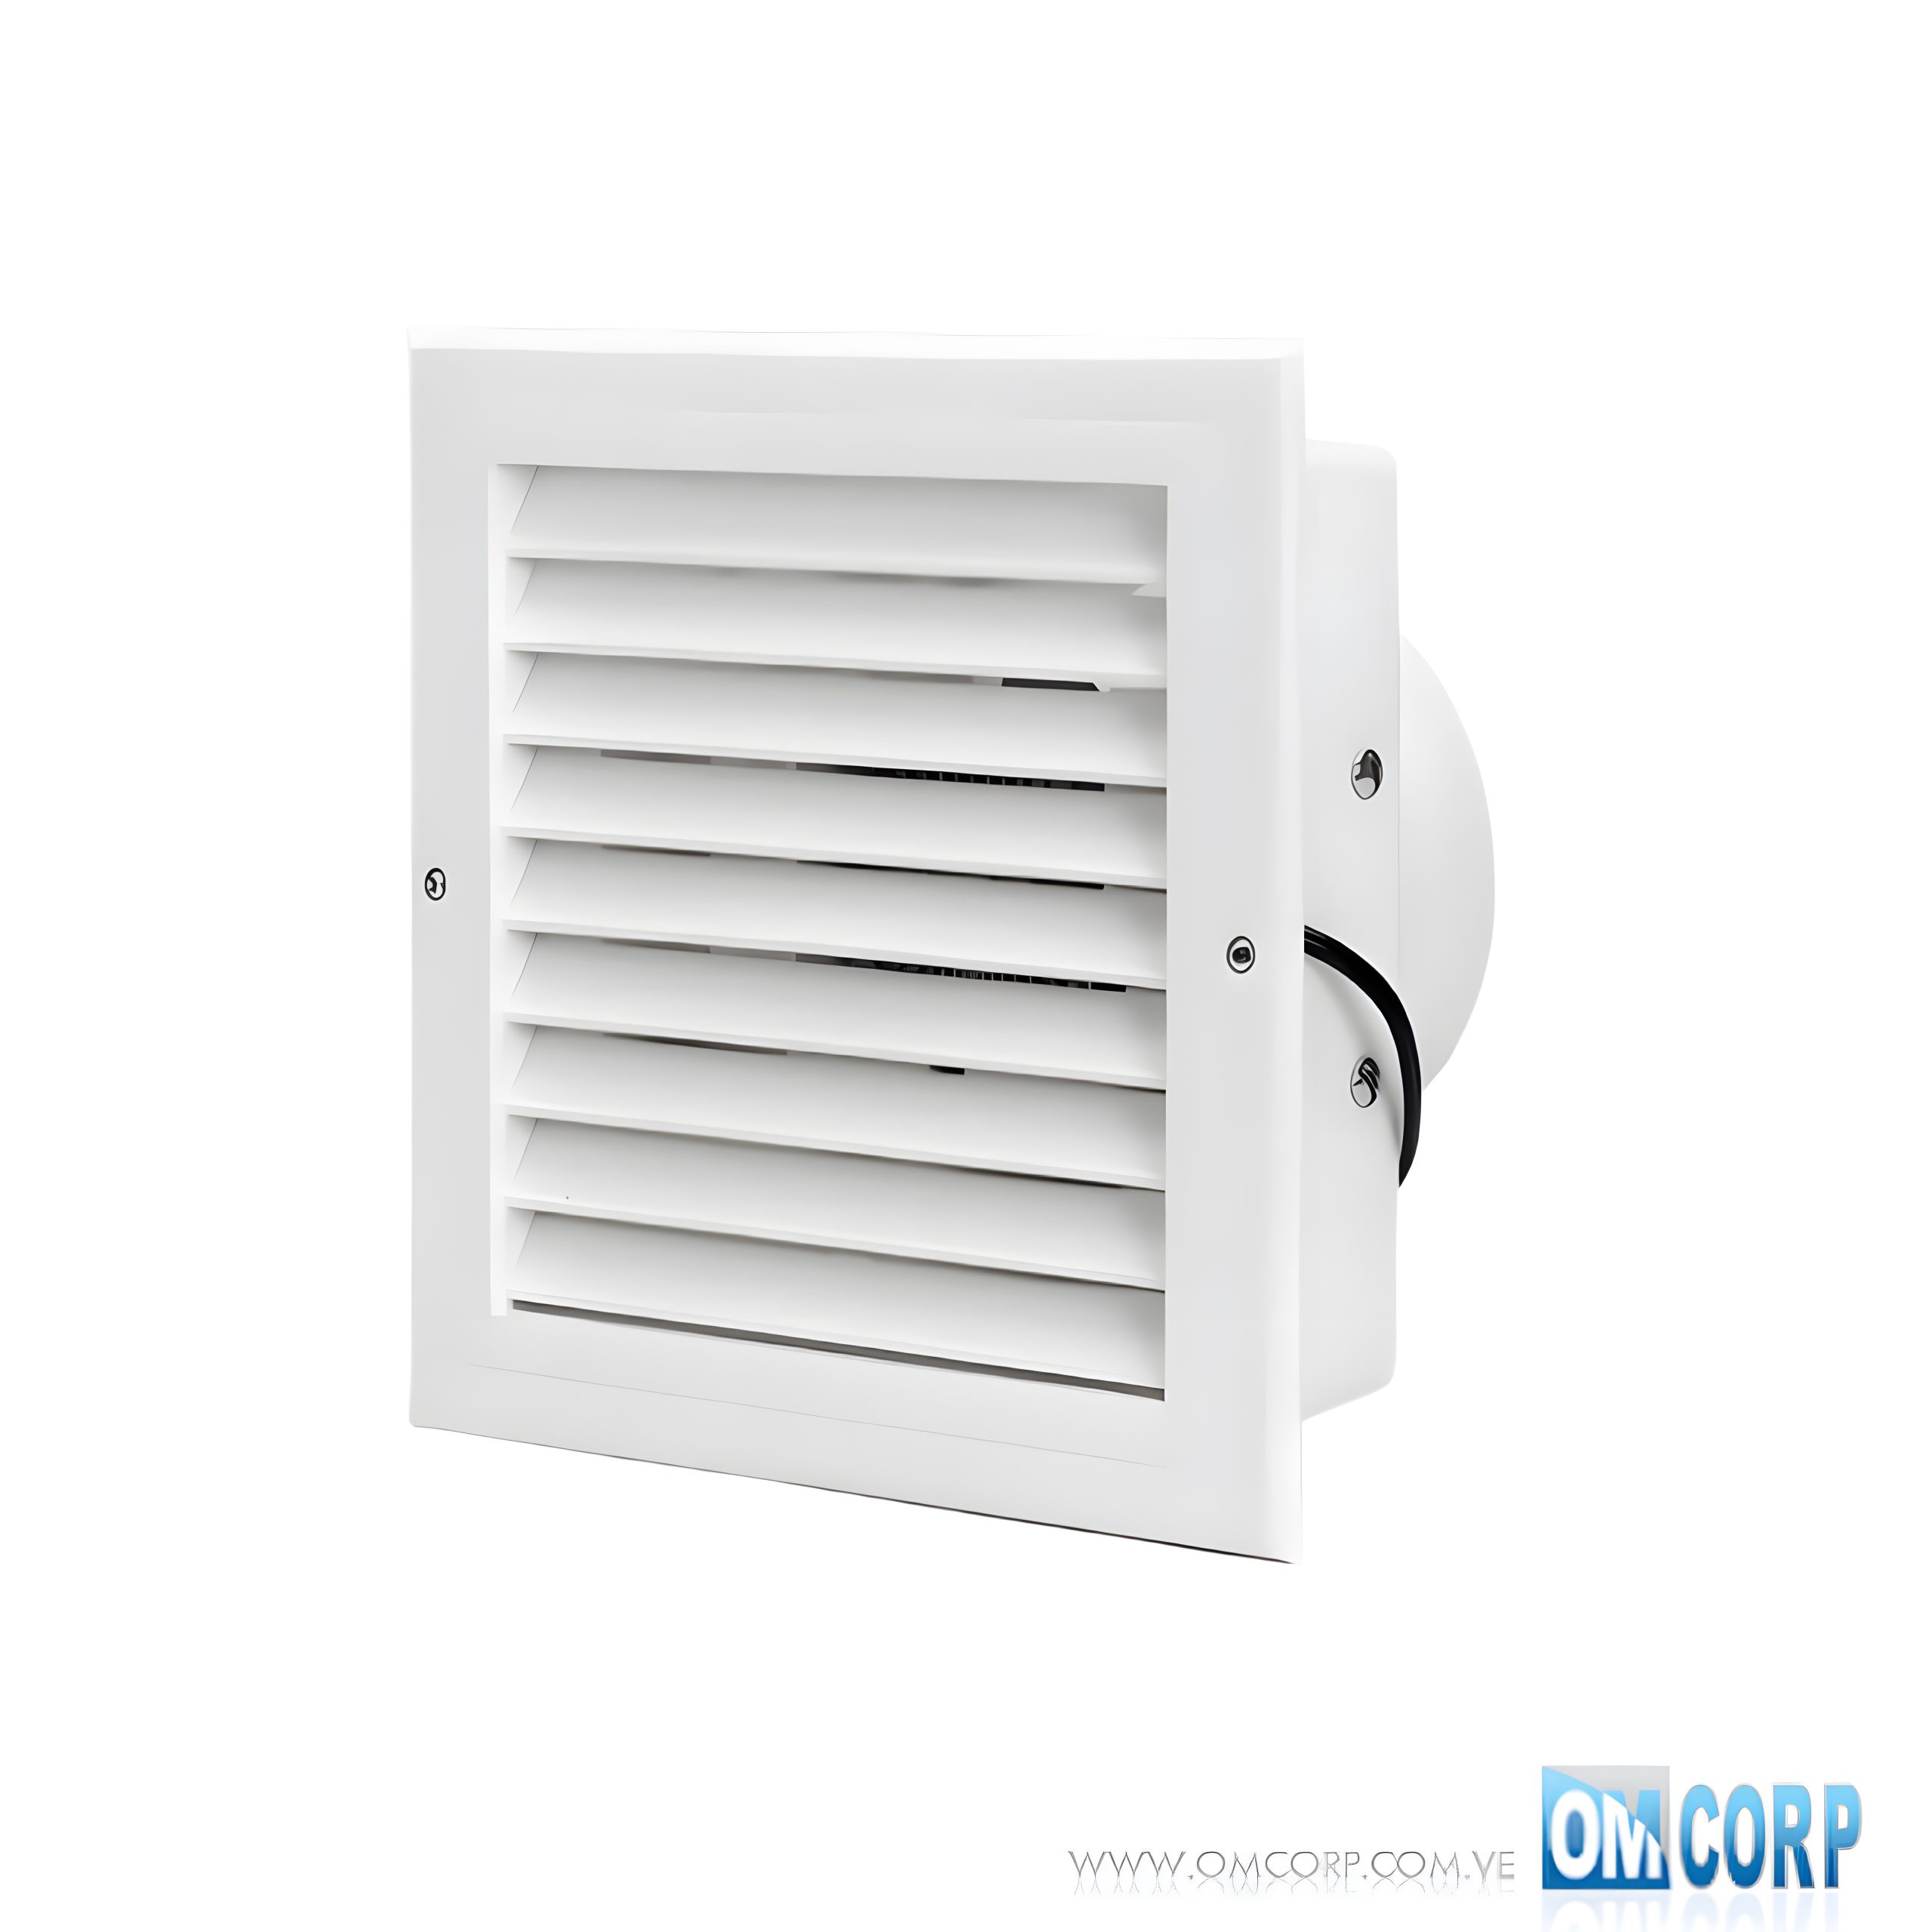 Extractor de Aire Pared 5